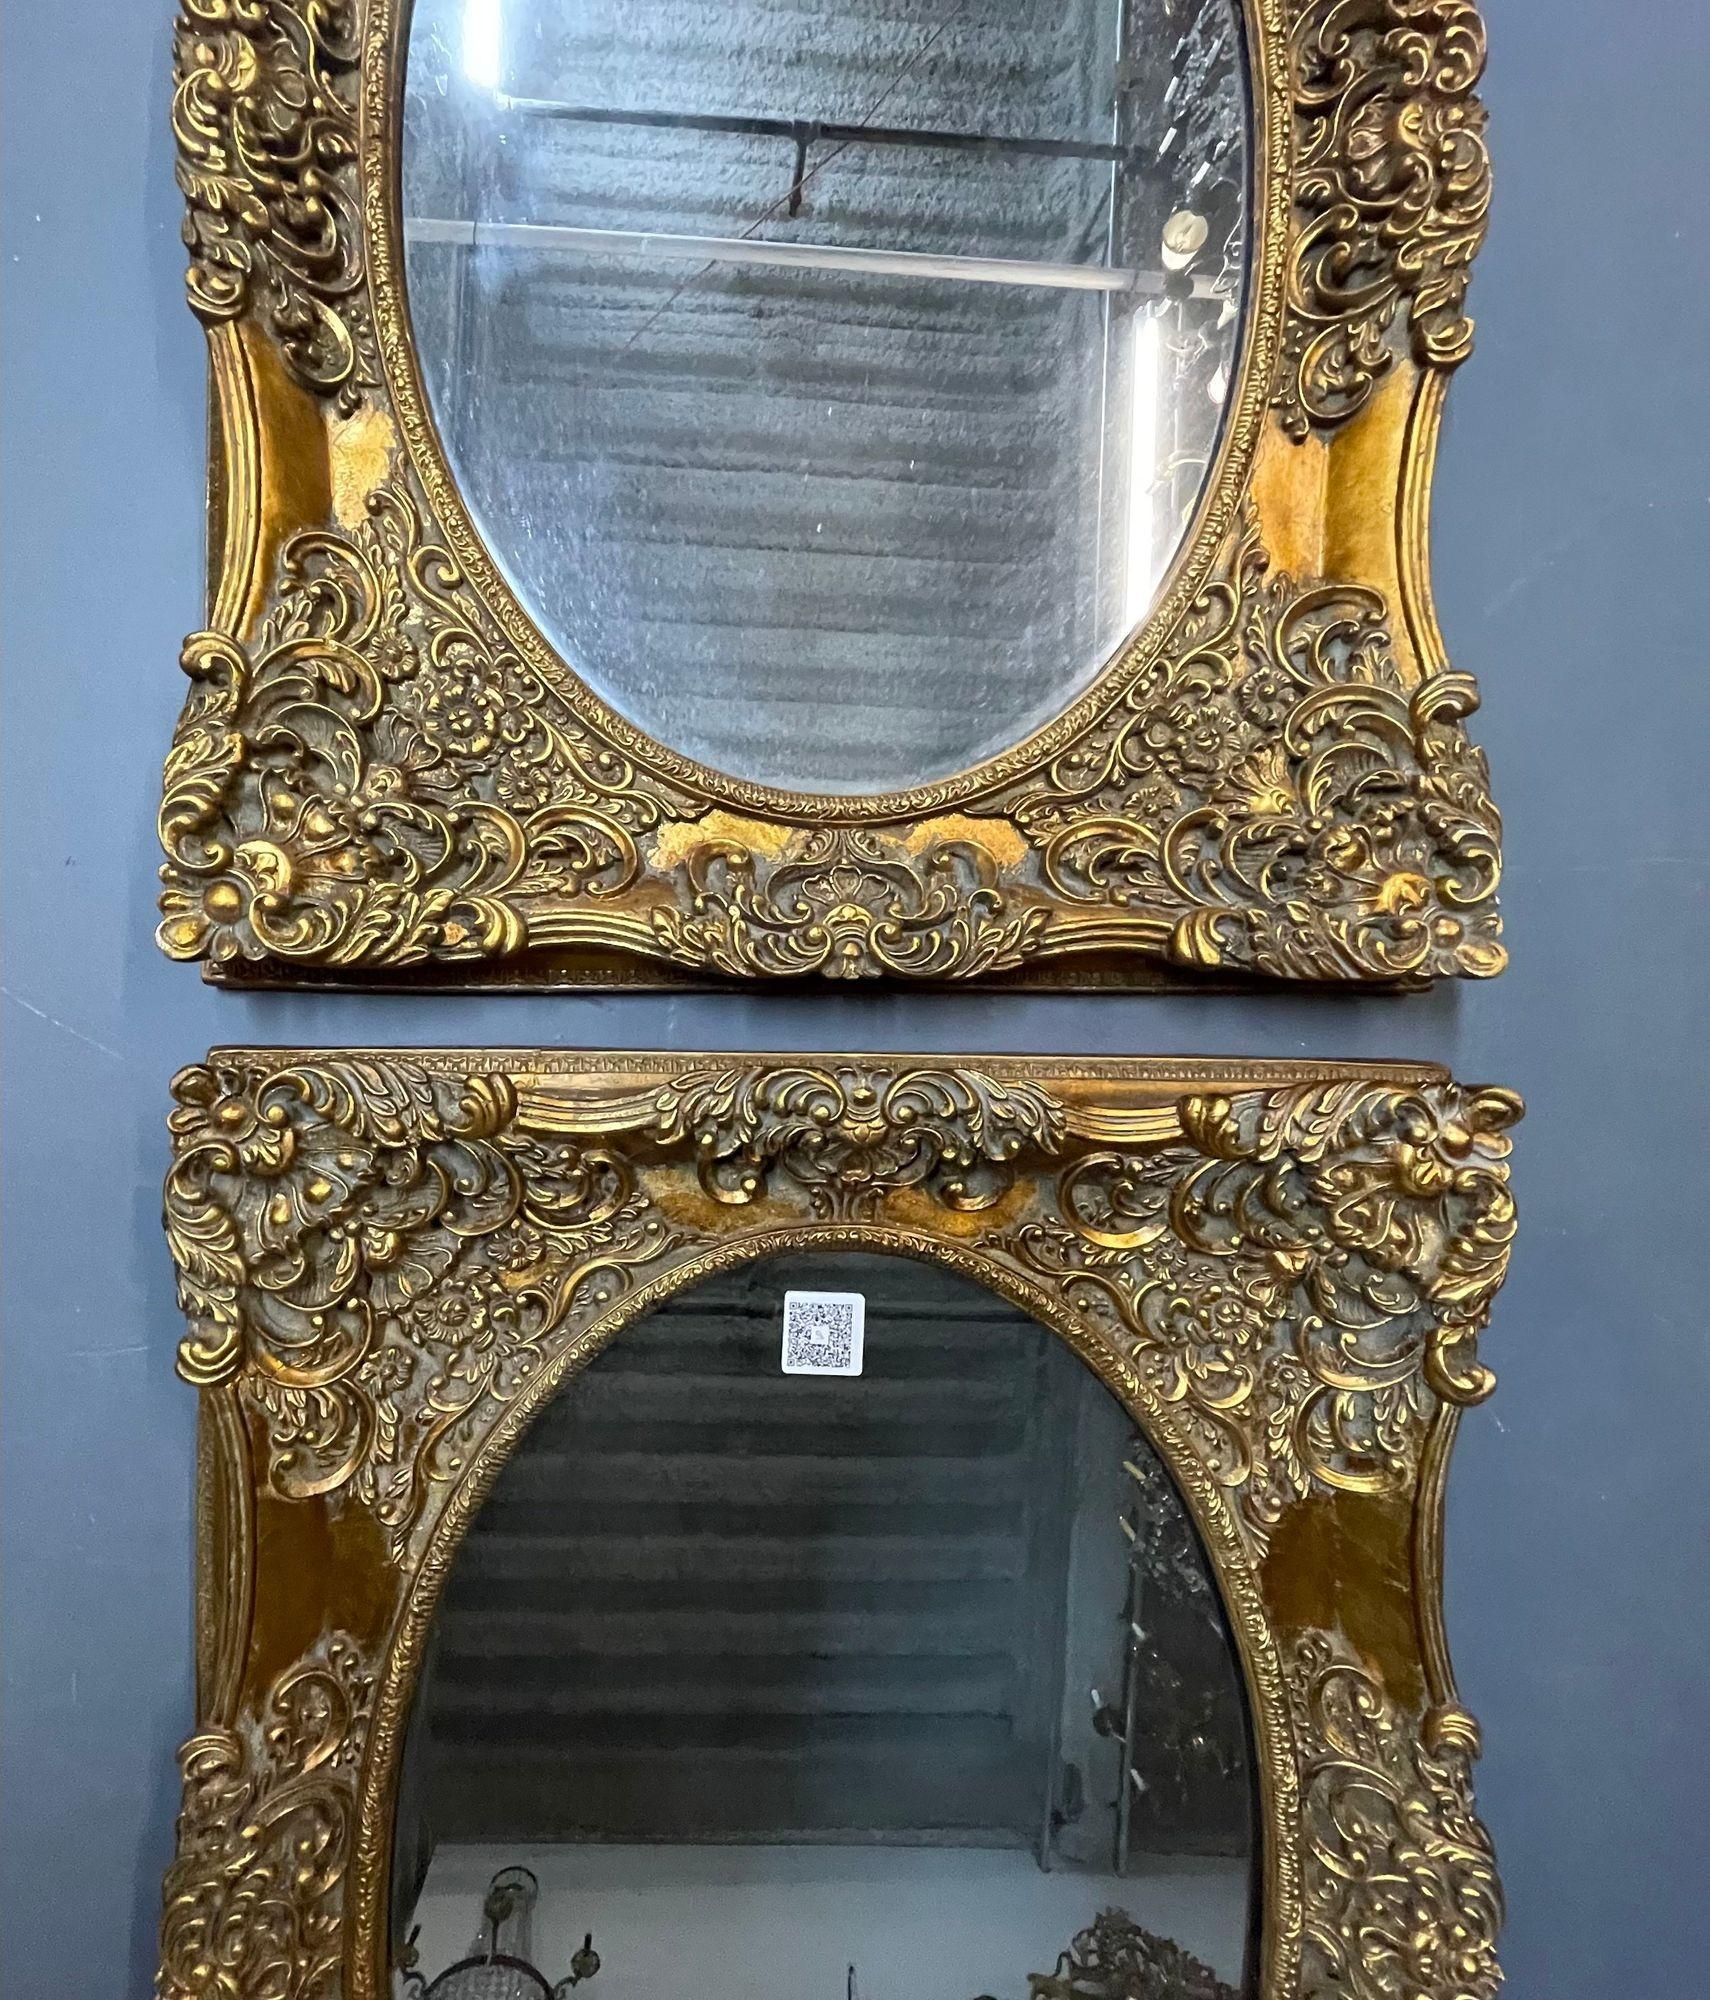 Pair of Louis XV Style Carved Wall, Console Mirrors

A pair of finely carved Louis XV style wall, console or over the mantel mirrors. Finely modelled scroll and rosette details embellish the rectangular frames which are equipped to be hung either